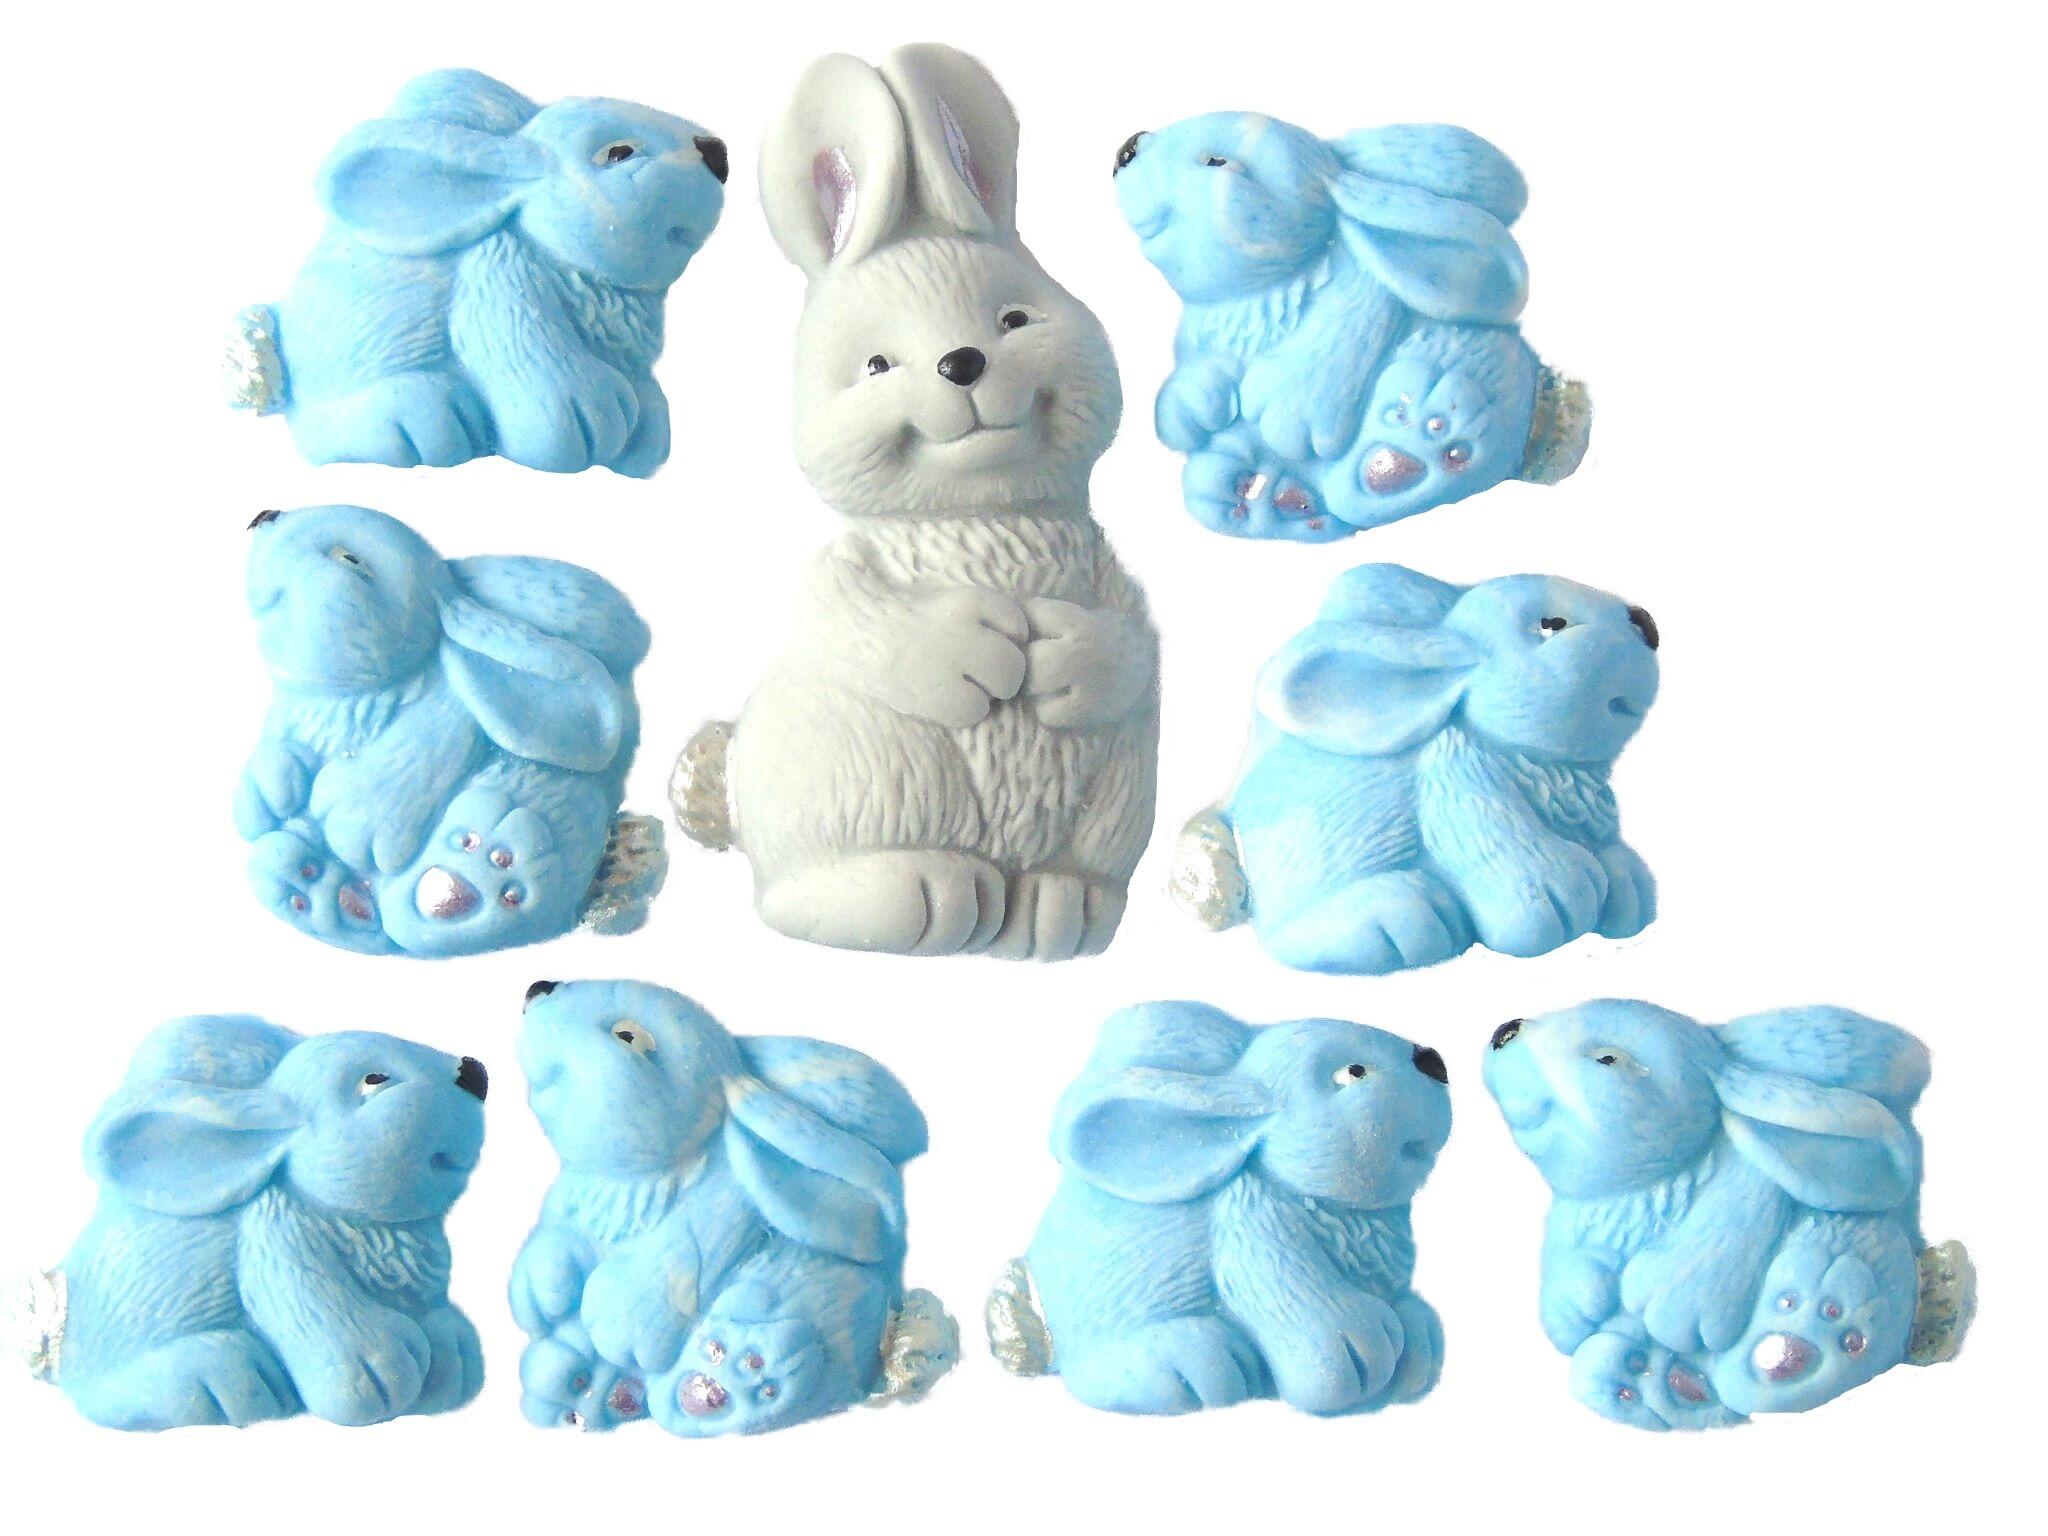 Easter Vegan Cake Decorations 1 Mother Rabbit and 8 Blue Baby Rabbits